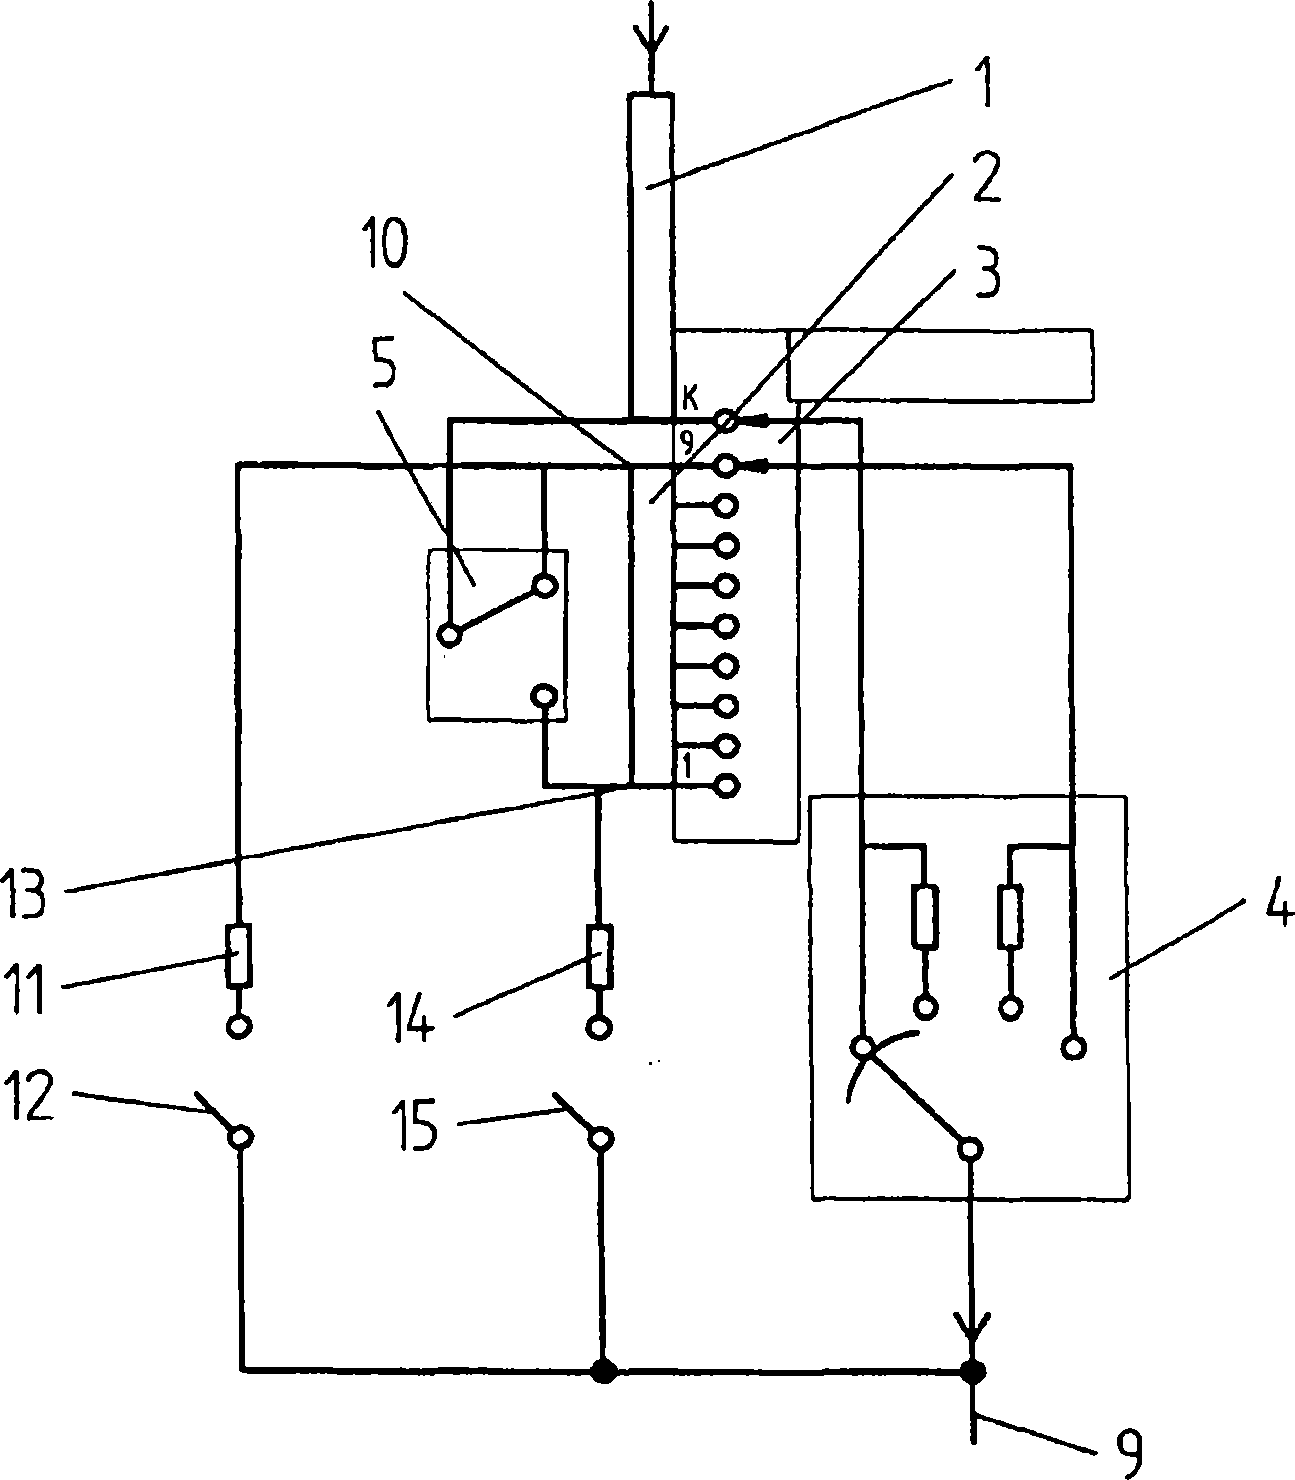 Step switch comprising a polarity switch for a variable transformer